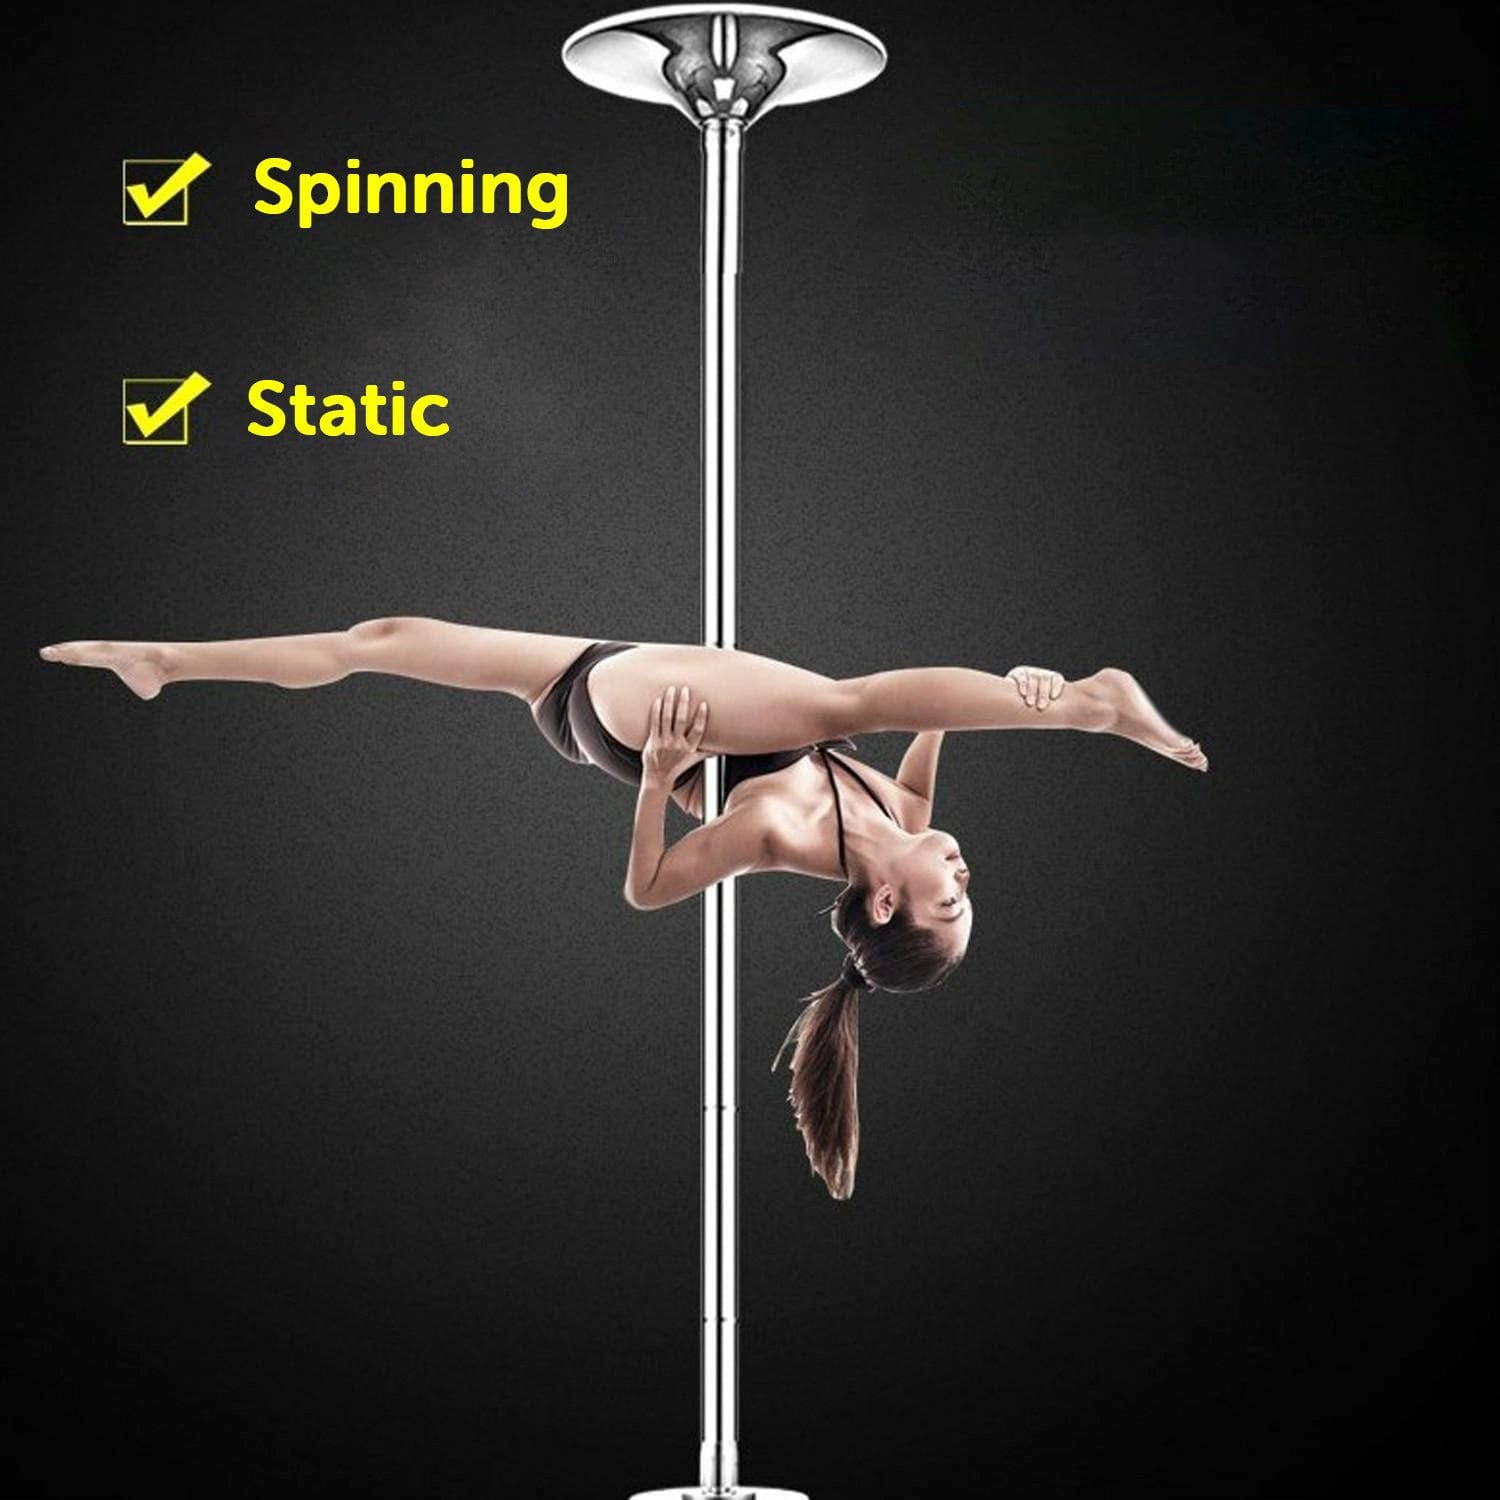 Portable Pole Dancing Pole Kit - Static & Spinning Fitness Pole Dancing Set